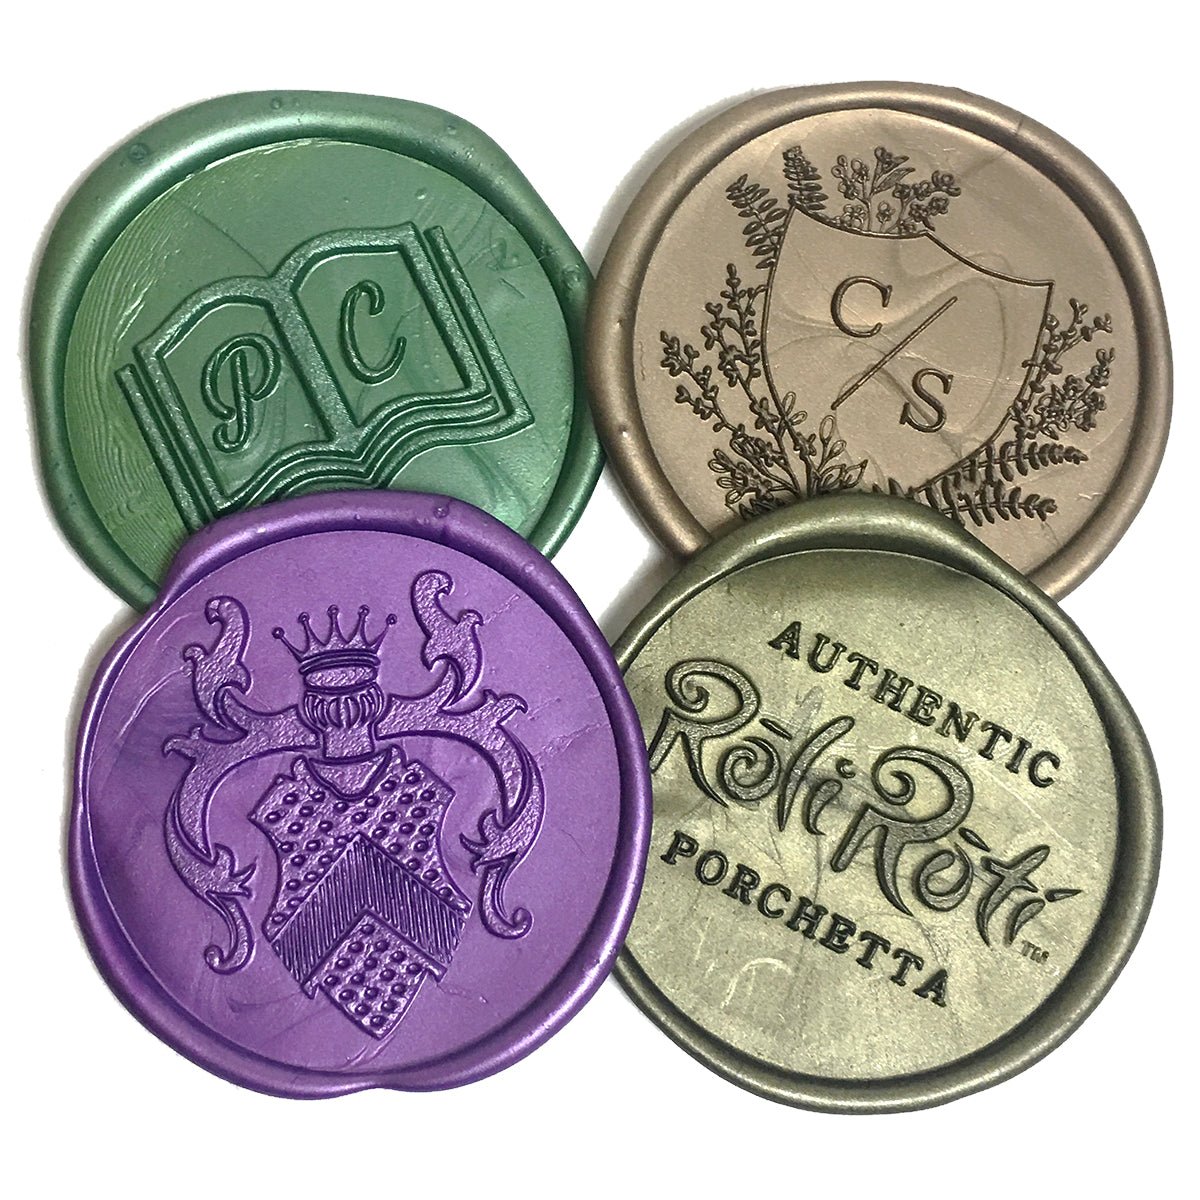 Adhesive Wax Seal Stickers with Your Logo or Art-Standard Sizes 3/4, 1 and 1 1/4 Finished Size